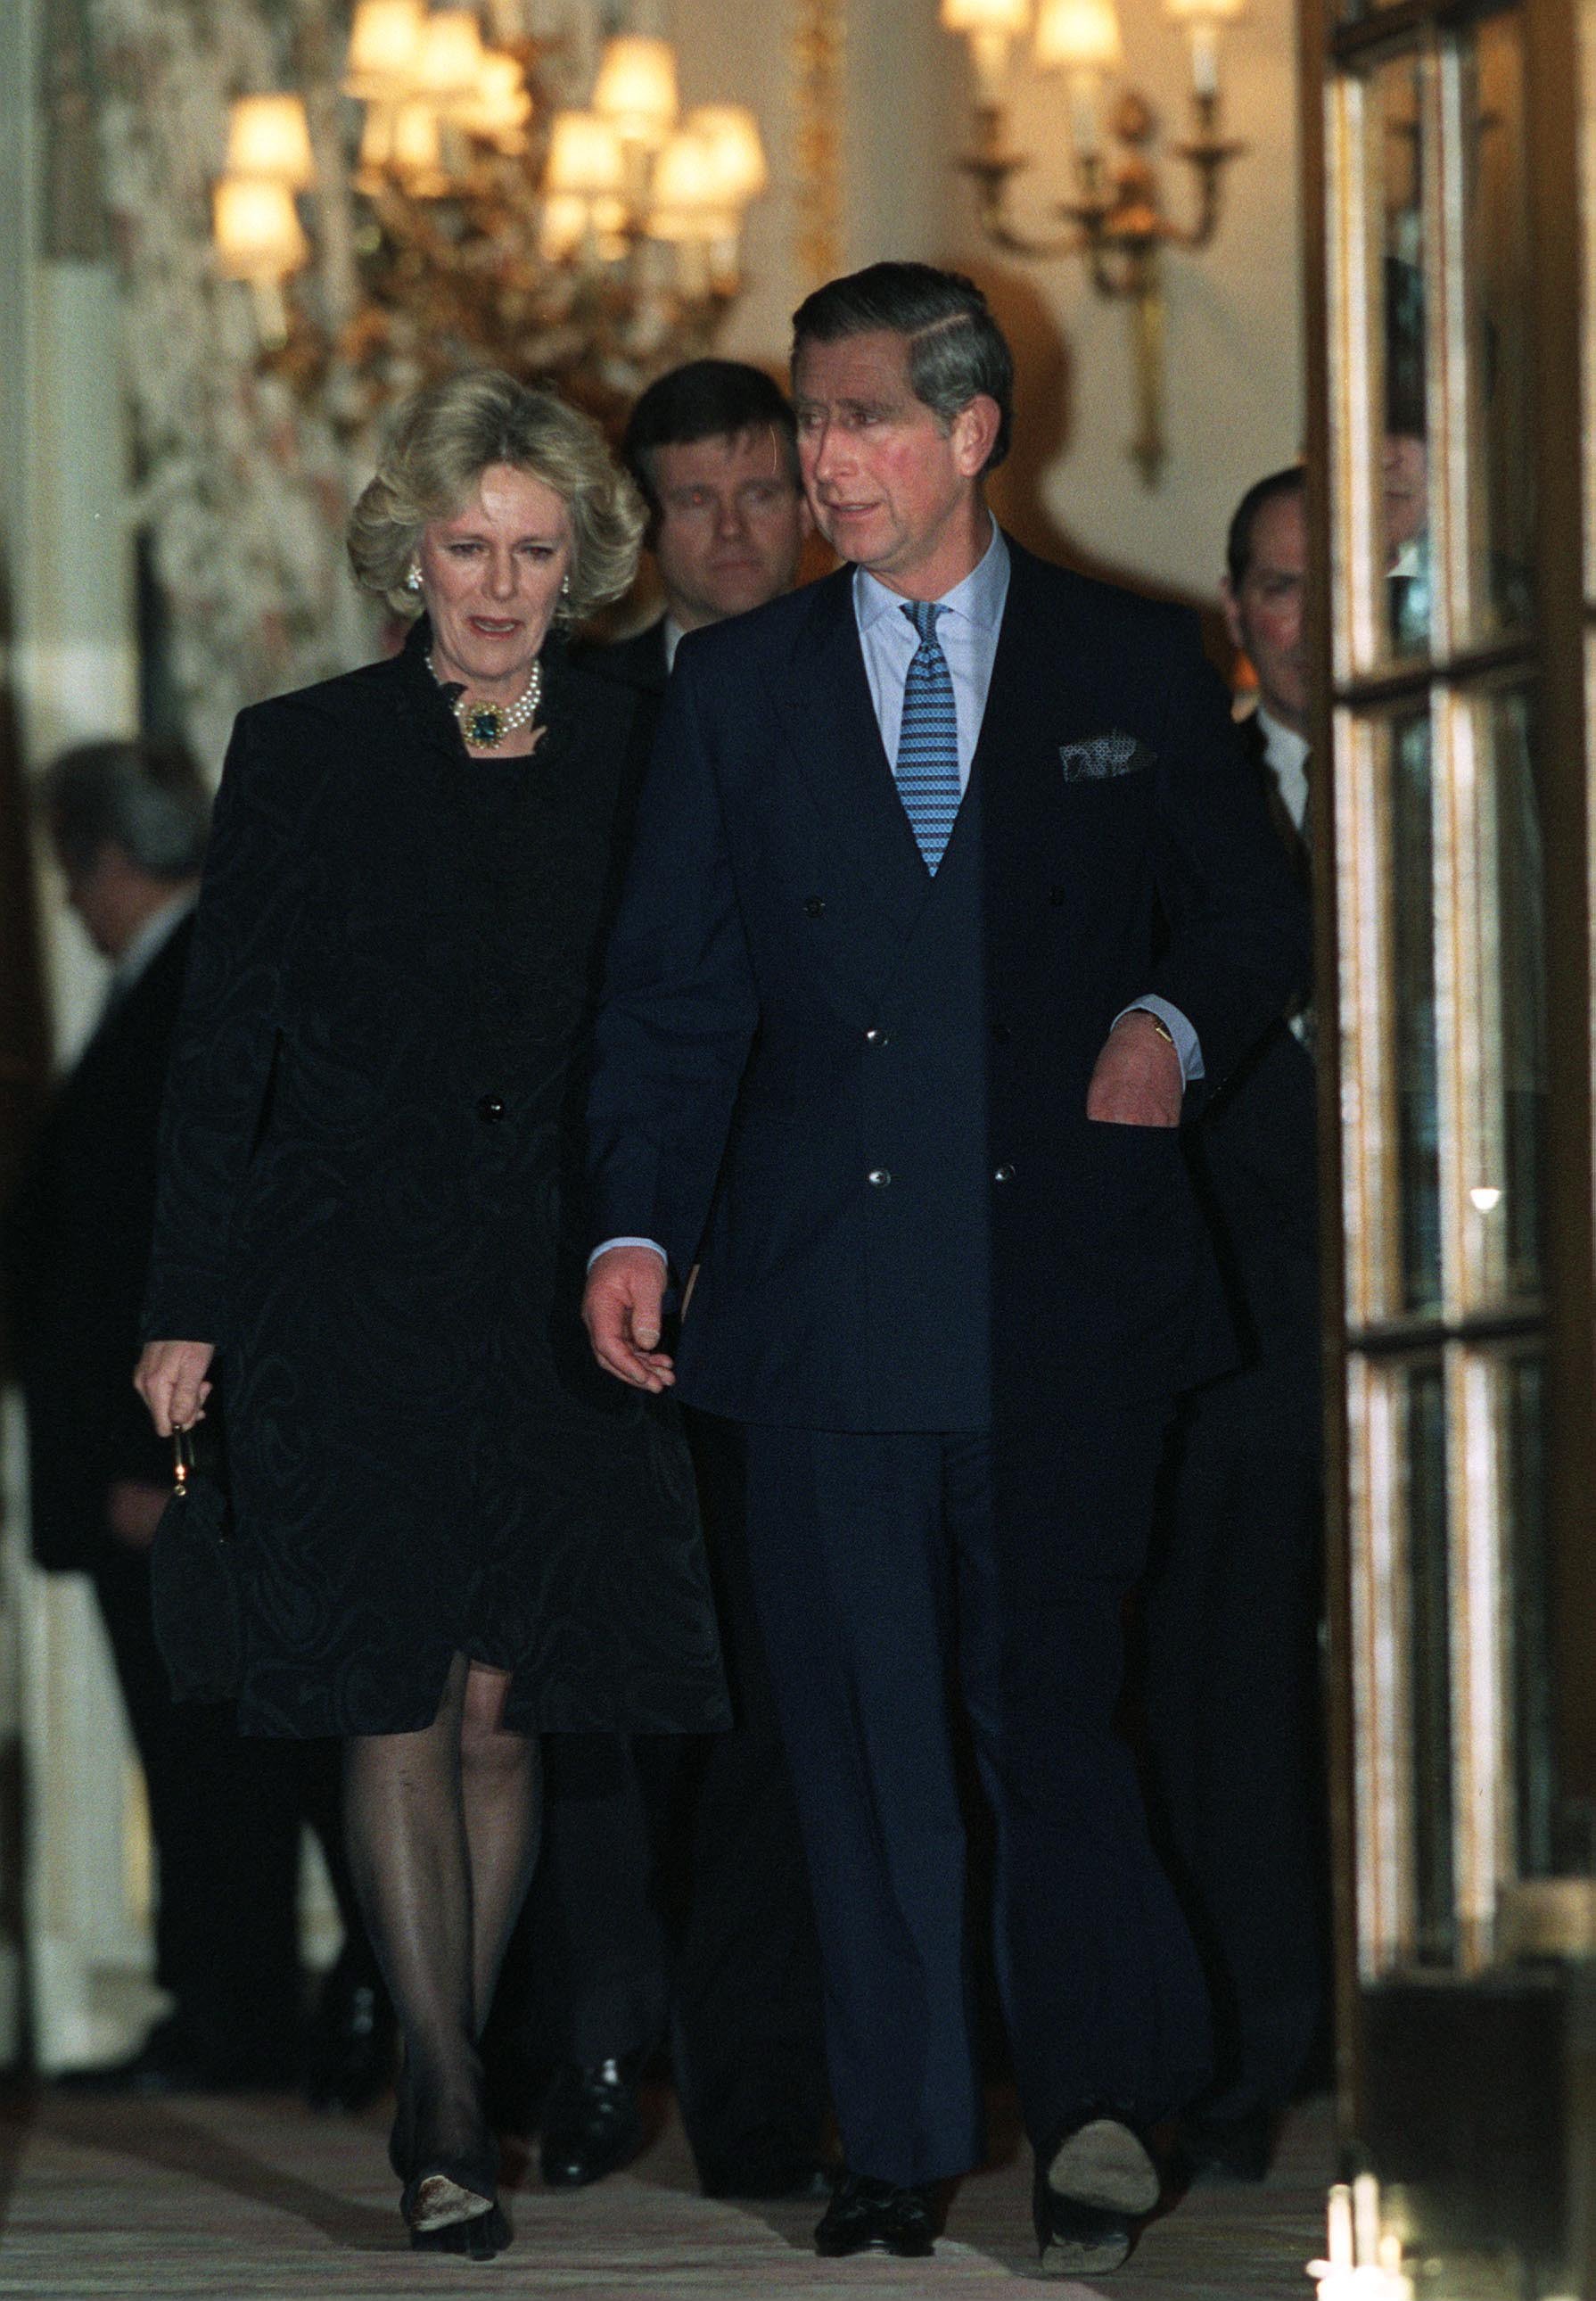 Prince Charles and his wife Camilla Parker-Bowles seen leaving the Ritz Hotel in London. | Source: Getty Images